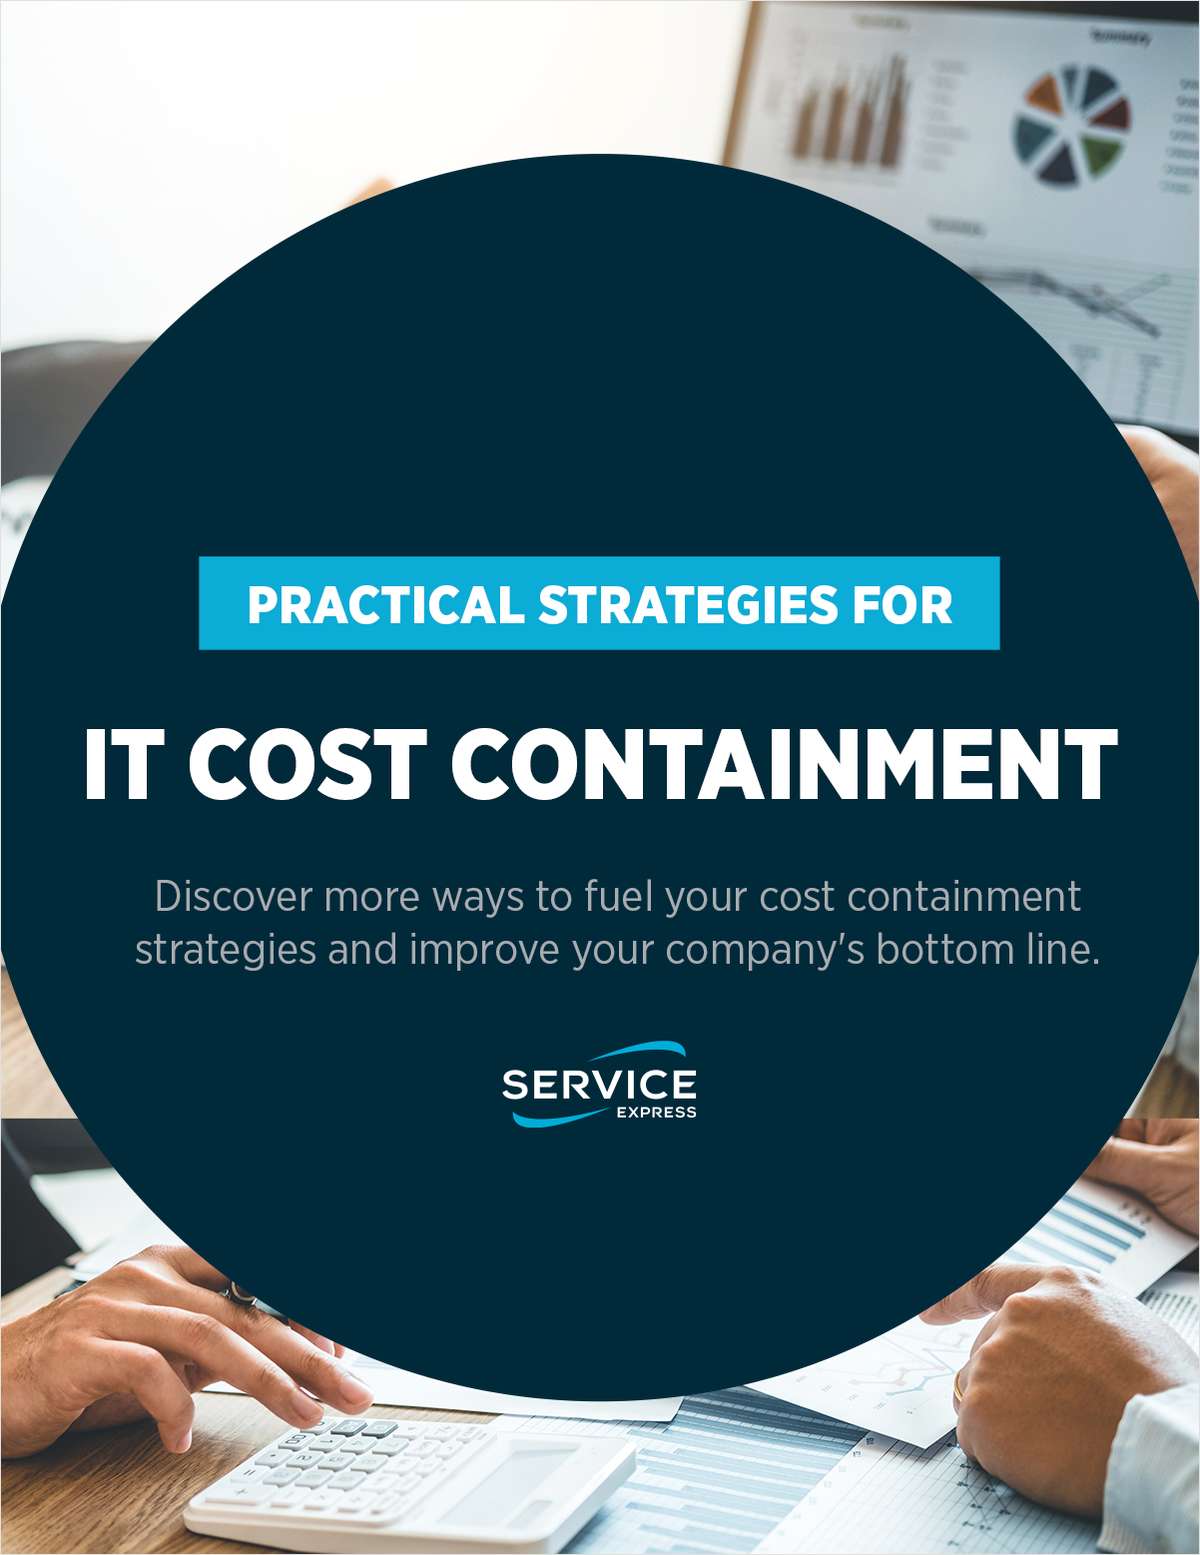 Practical Strategies for IT Cost Containment